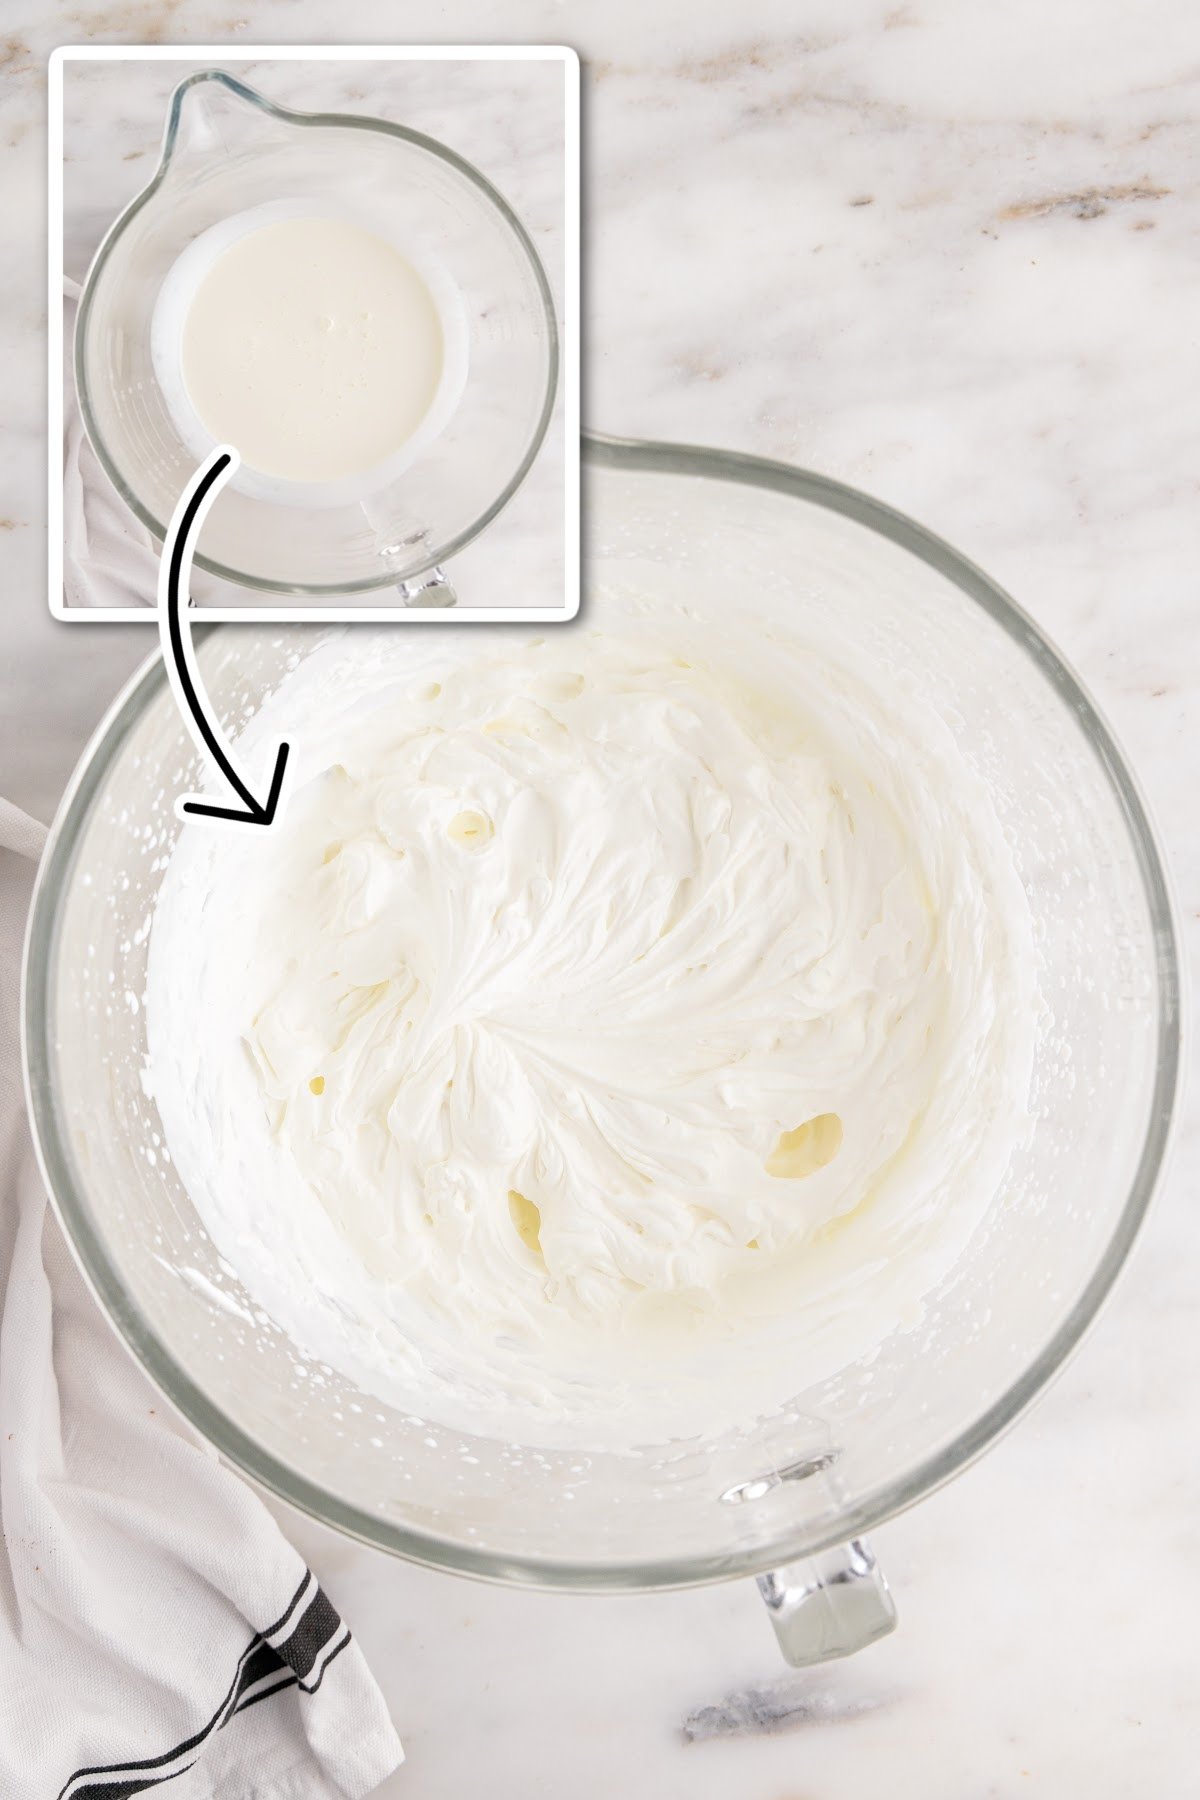 Beating the heavy cream into whipped cream for the topping.